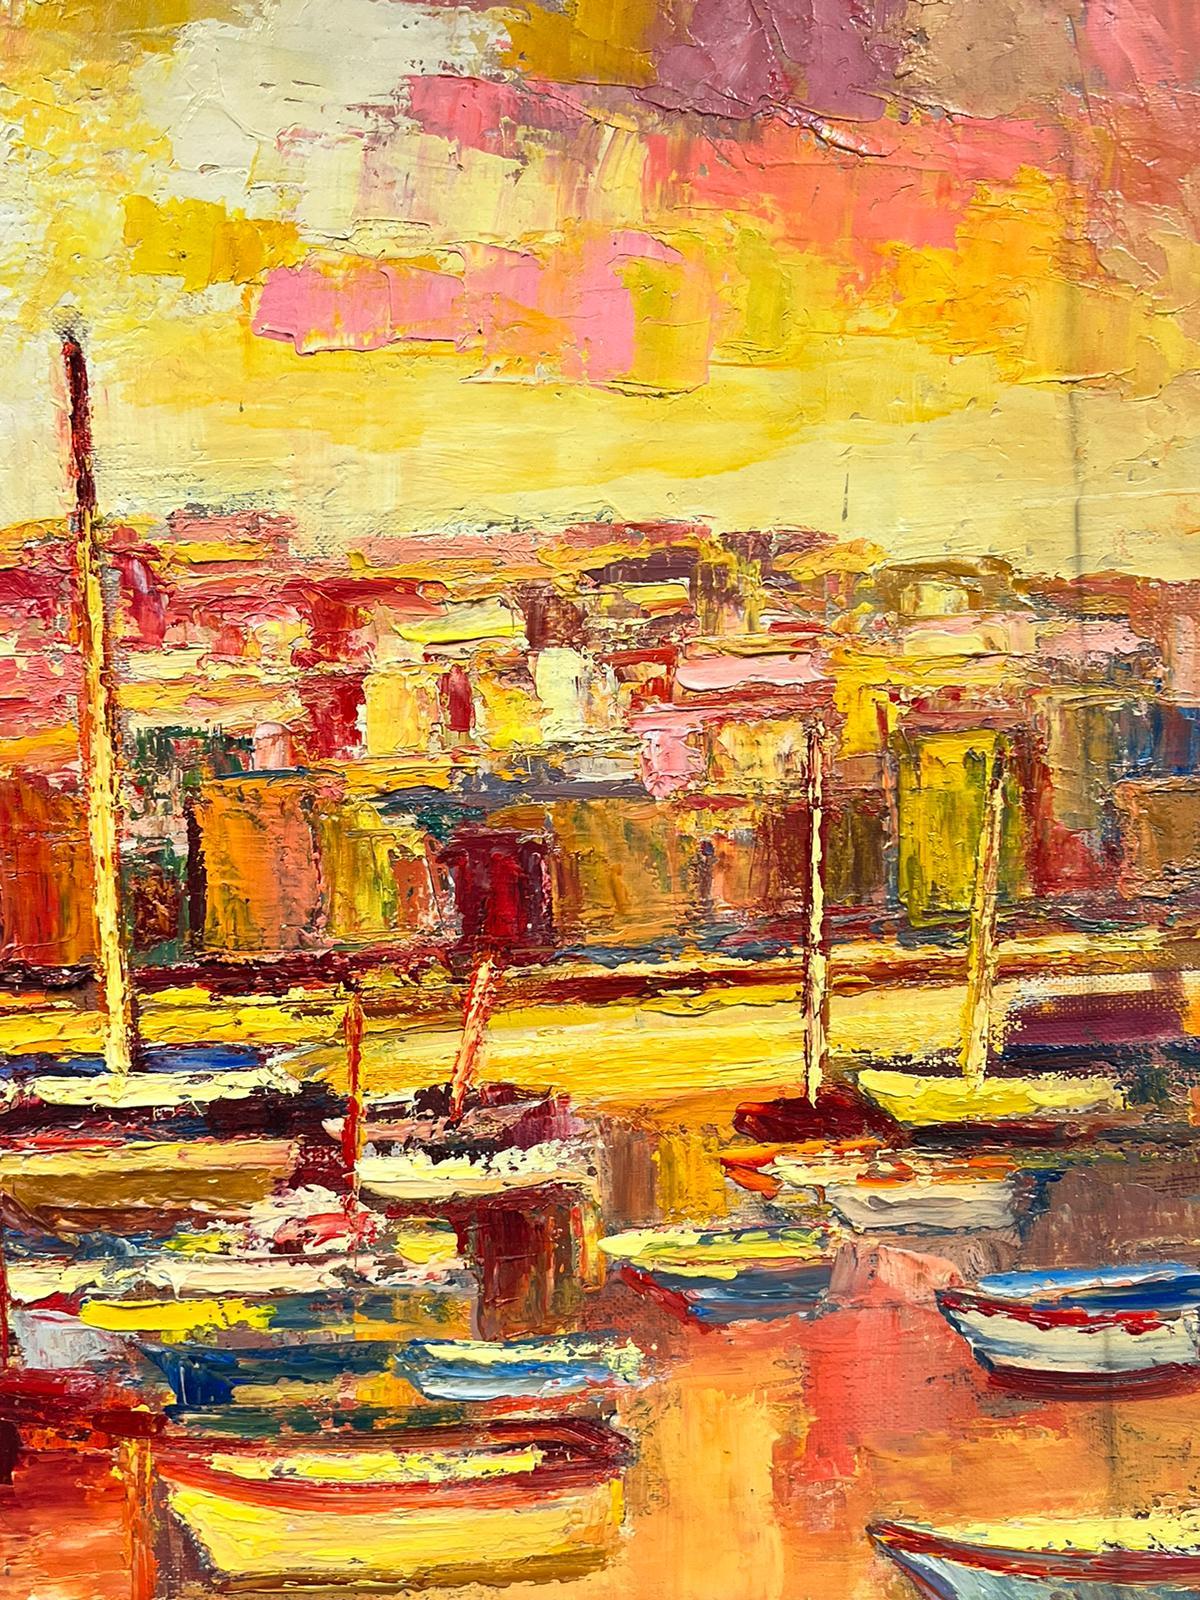 Marseille Harbour
by Josine Vignon (French 1922-2022) 
stamped verso
oil painting on canvas, unframed
canvas: 26 x 21 inches
very good condition 
provenance: from the artists estate, France

Josine Vignon (1922-2022) was a French artist living on